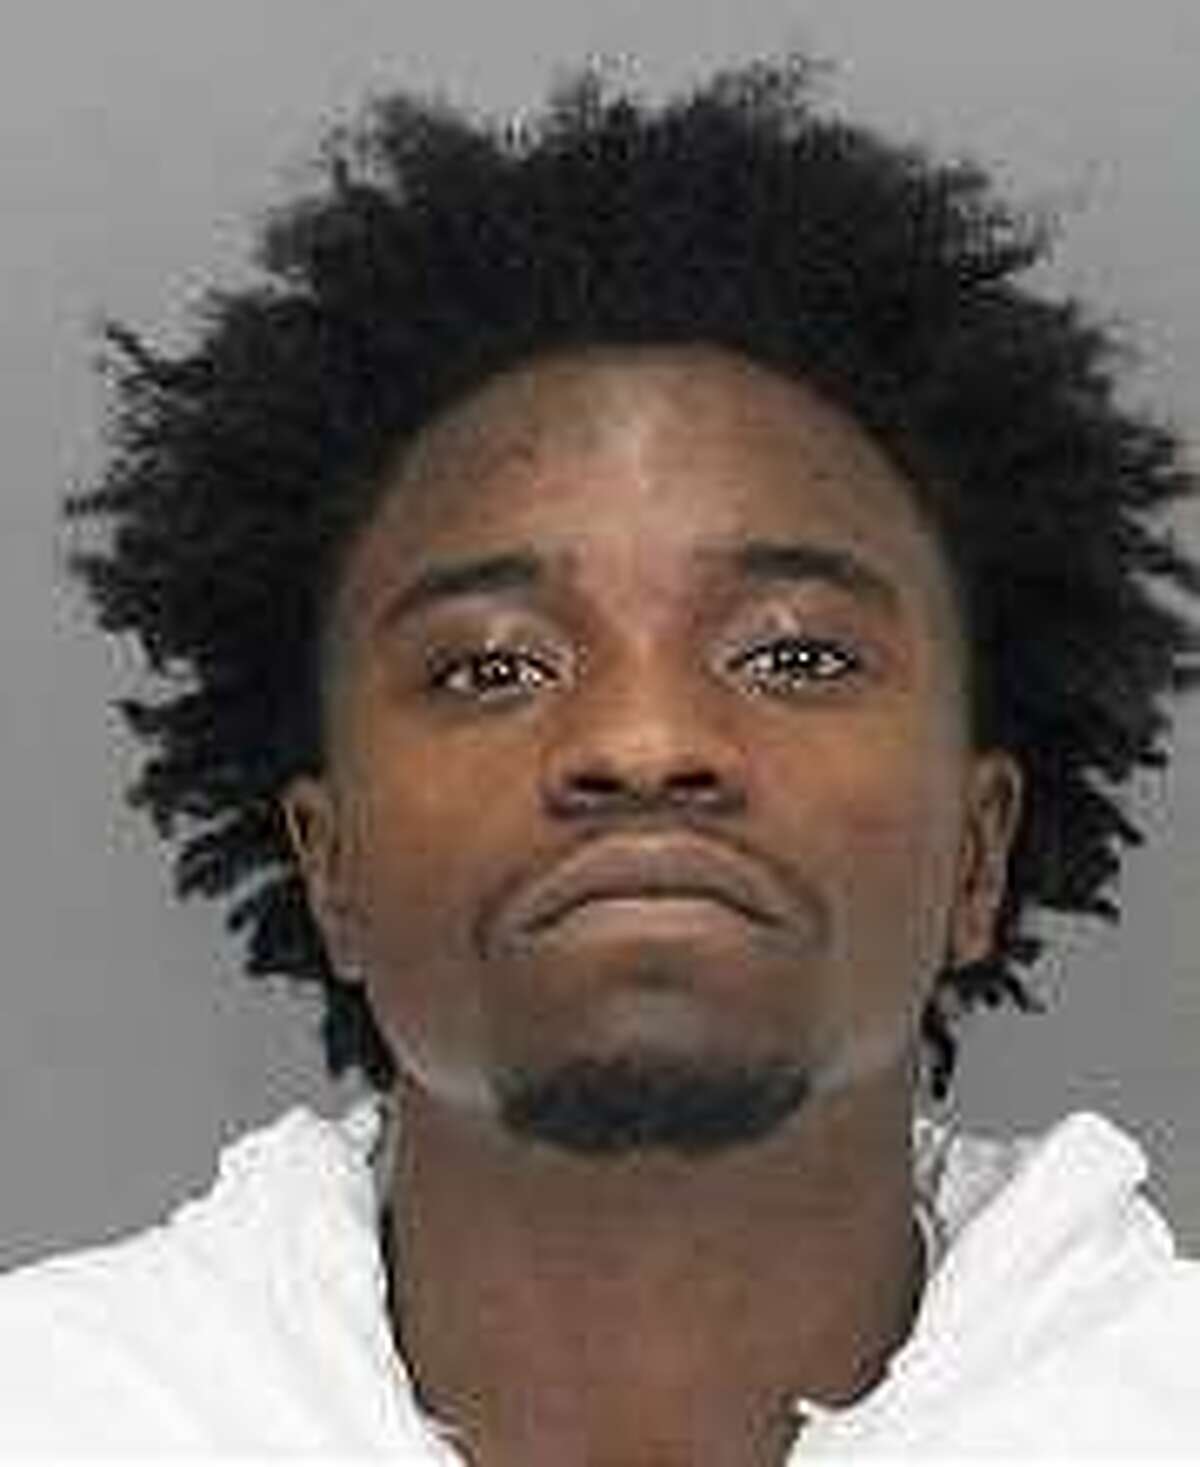 San Jose resident Muniunmee Hendrix, 21, was arrested following a shooting death at a San Jose liquor store, police said Friday.